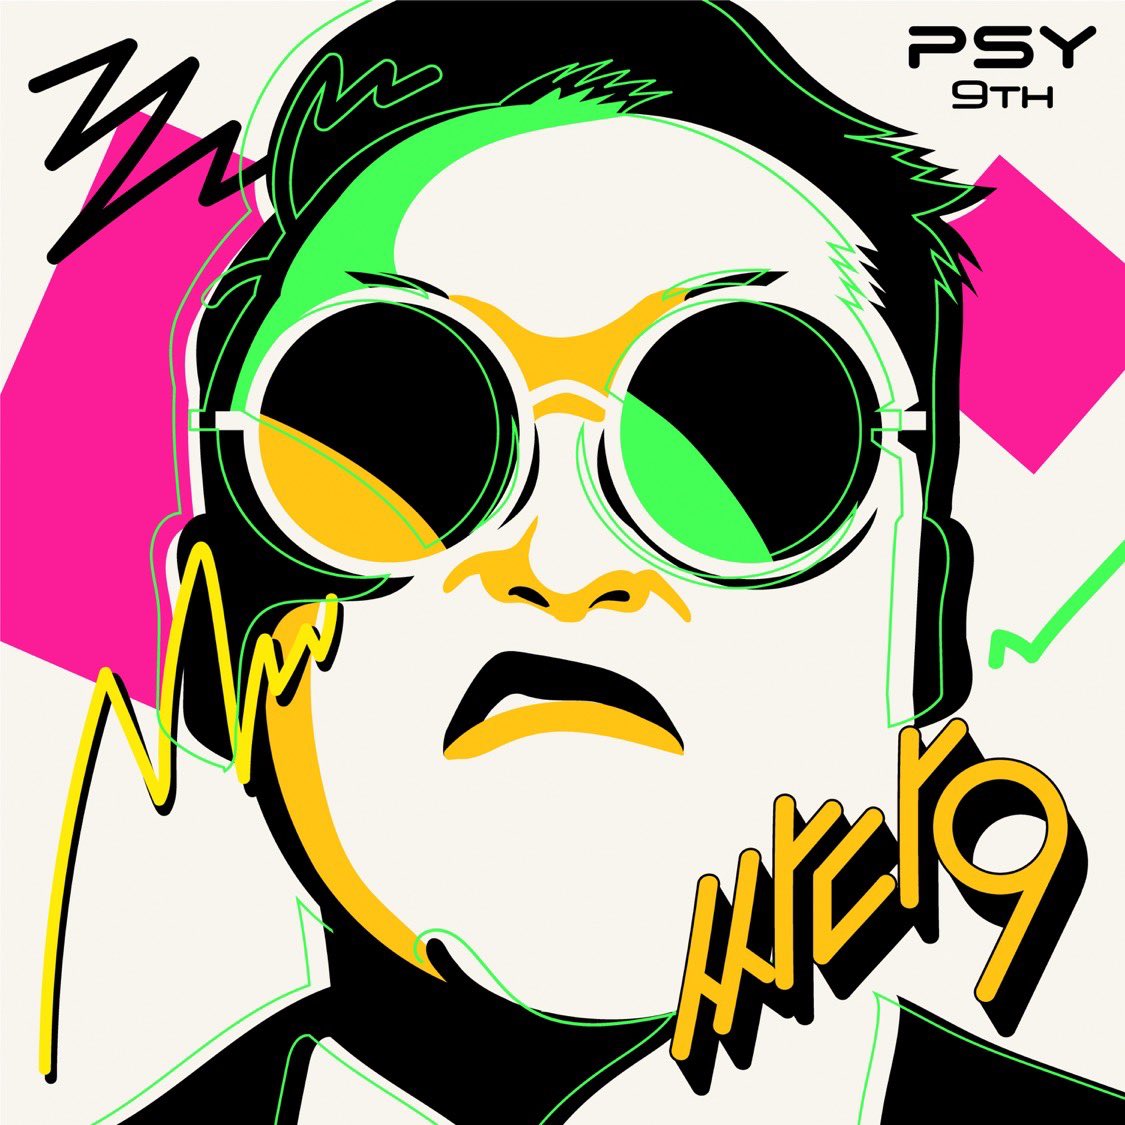 #Nowplaying That That (prod. & feat. SUGA of BTS) - サイ (PSY 9th) ♪

iTunes Store で買った（σ・з・）σ https://t.co/O7bF4EbEAD